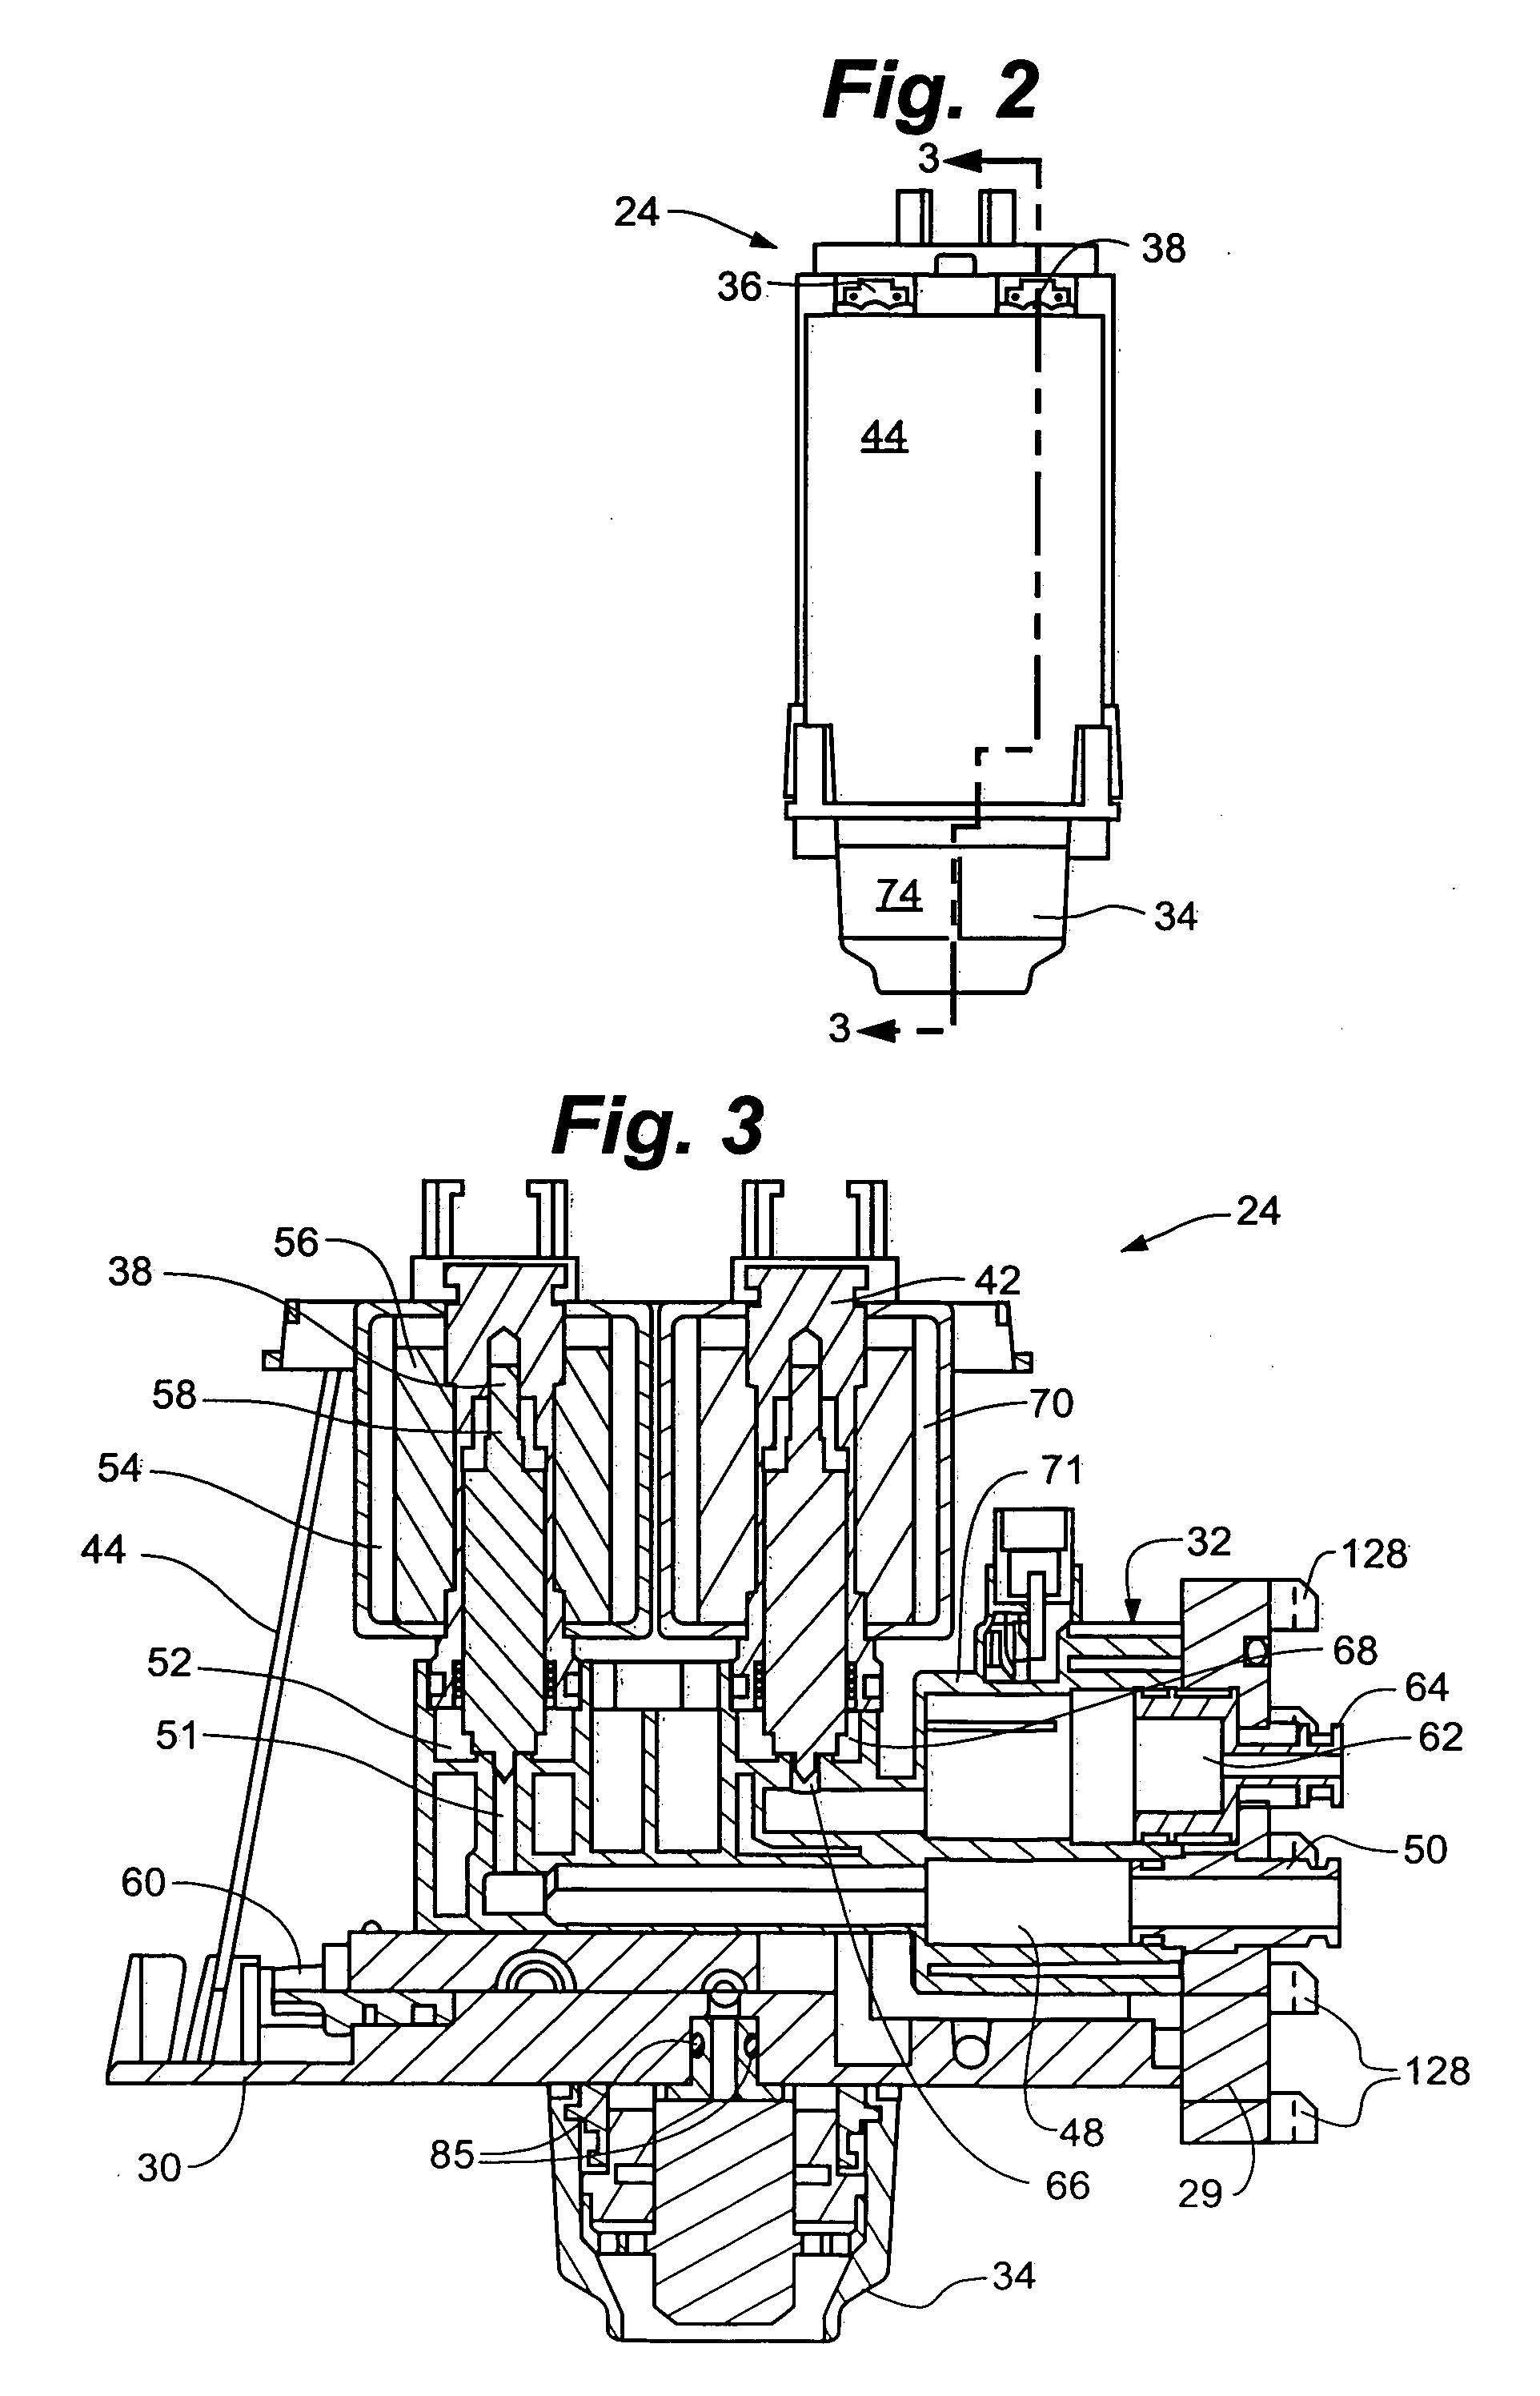 Beverage dispensing system with a head capable of dispensing plural different beverages